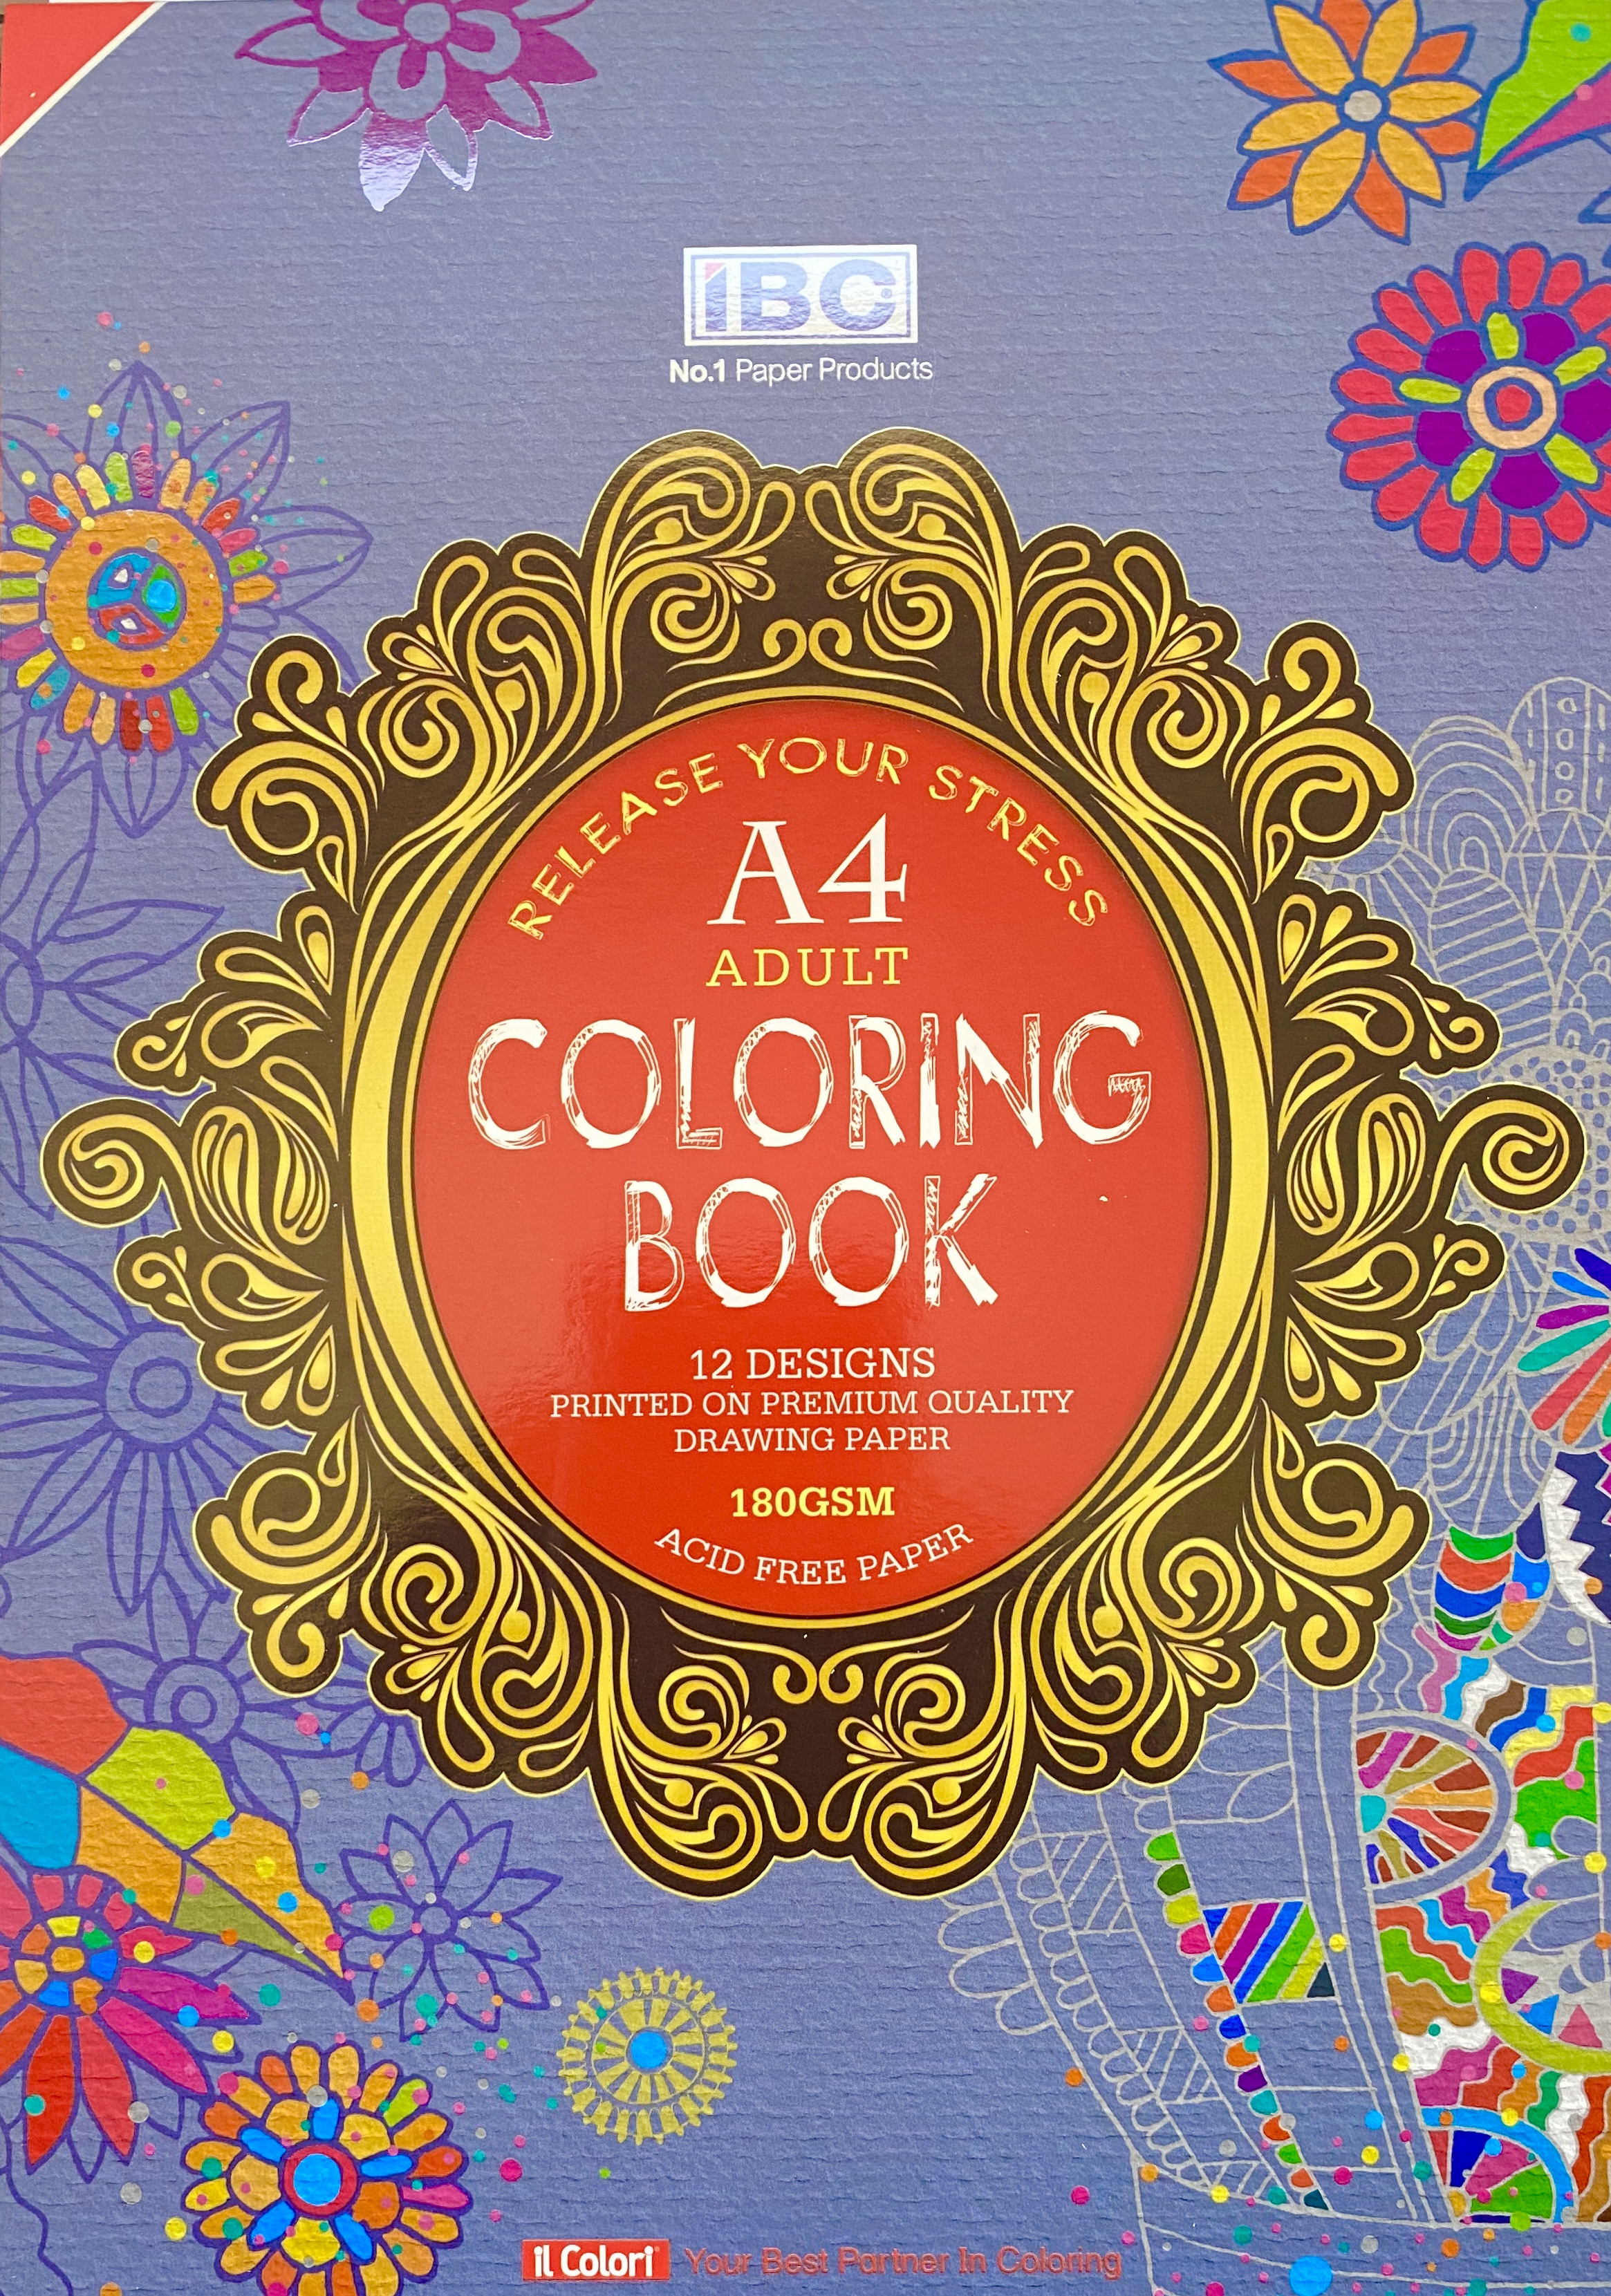 Release Your Stress Coloring Book - A4 Size